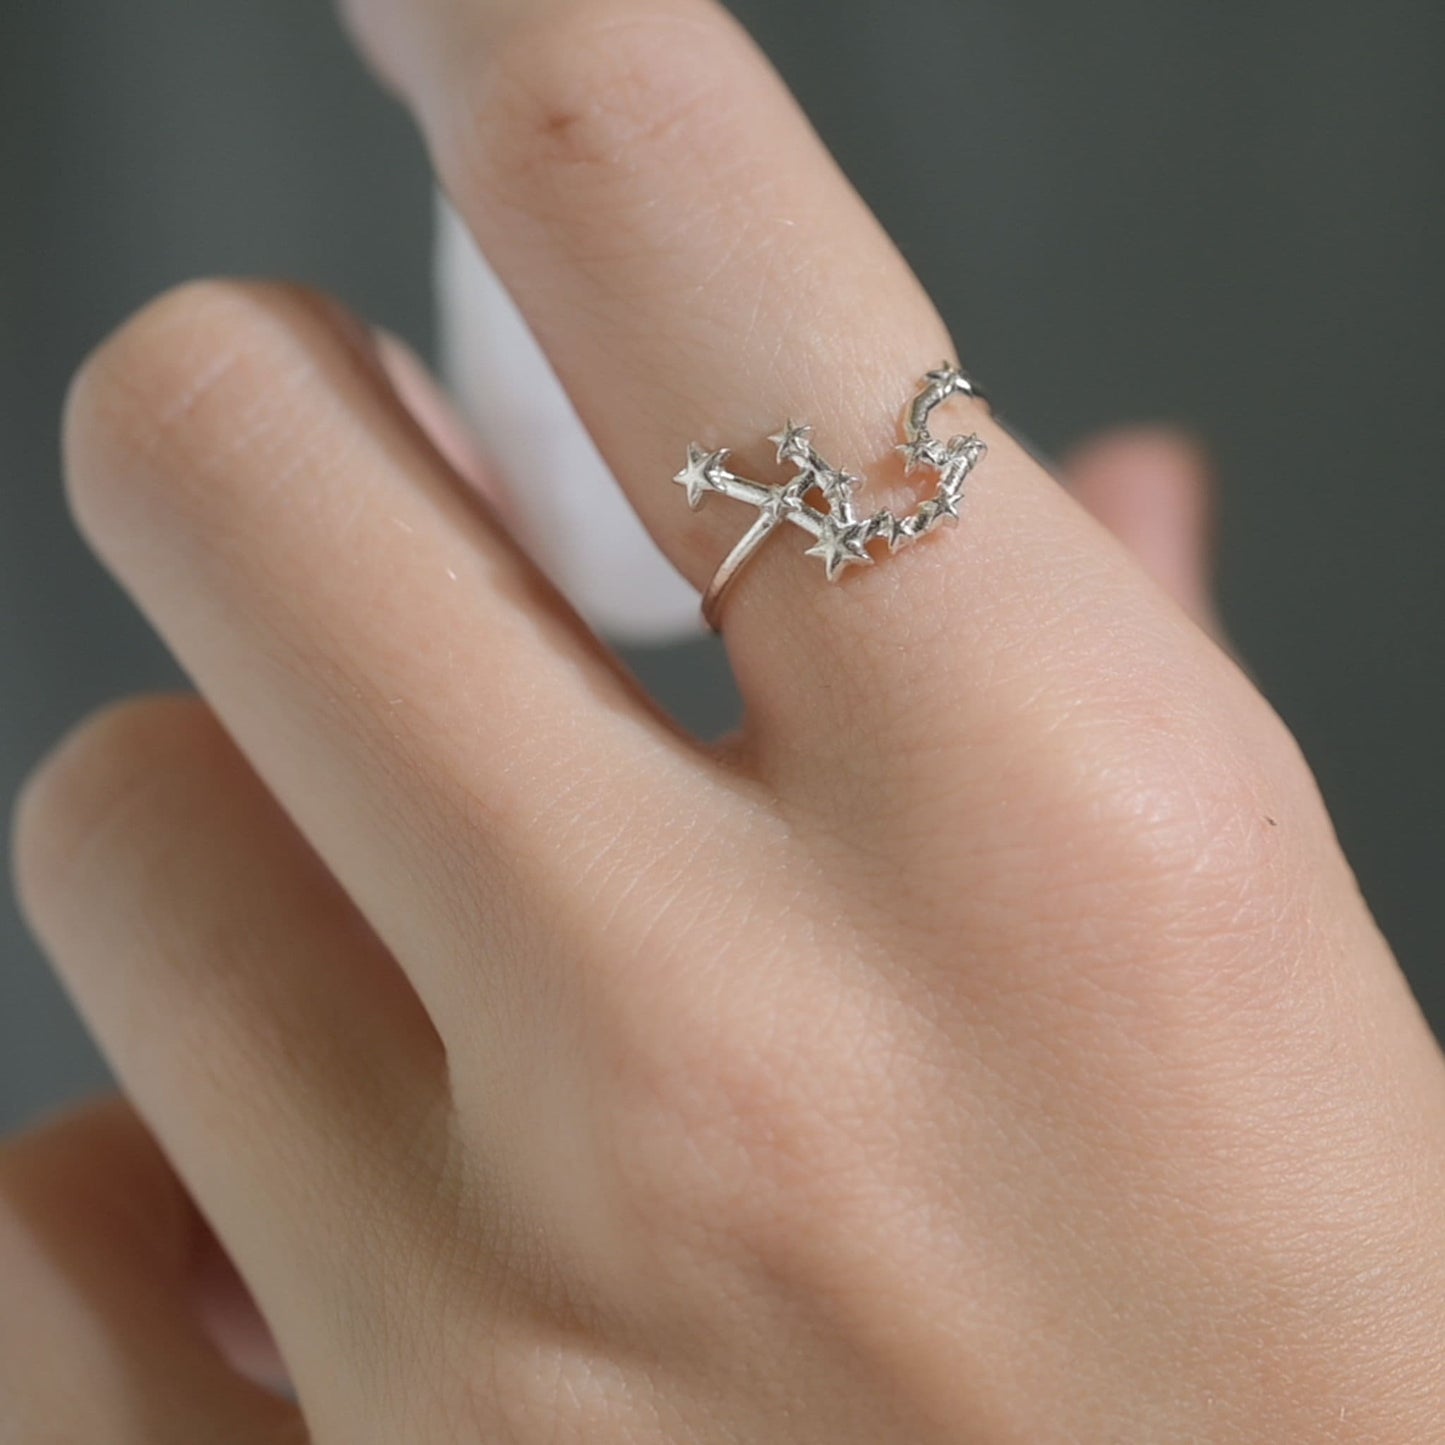 Solid Gold Aquarius, Star Sign Dainty Celestial Zodiac Ring in 4K Yellow Gold, 14k White Gold, 14K Rose Gold